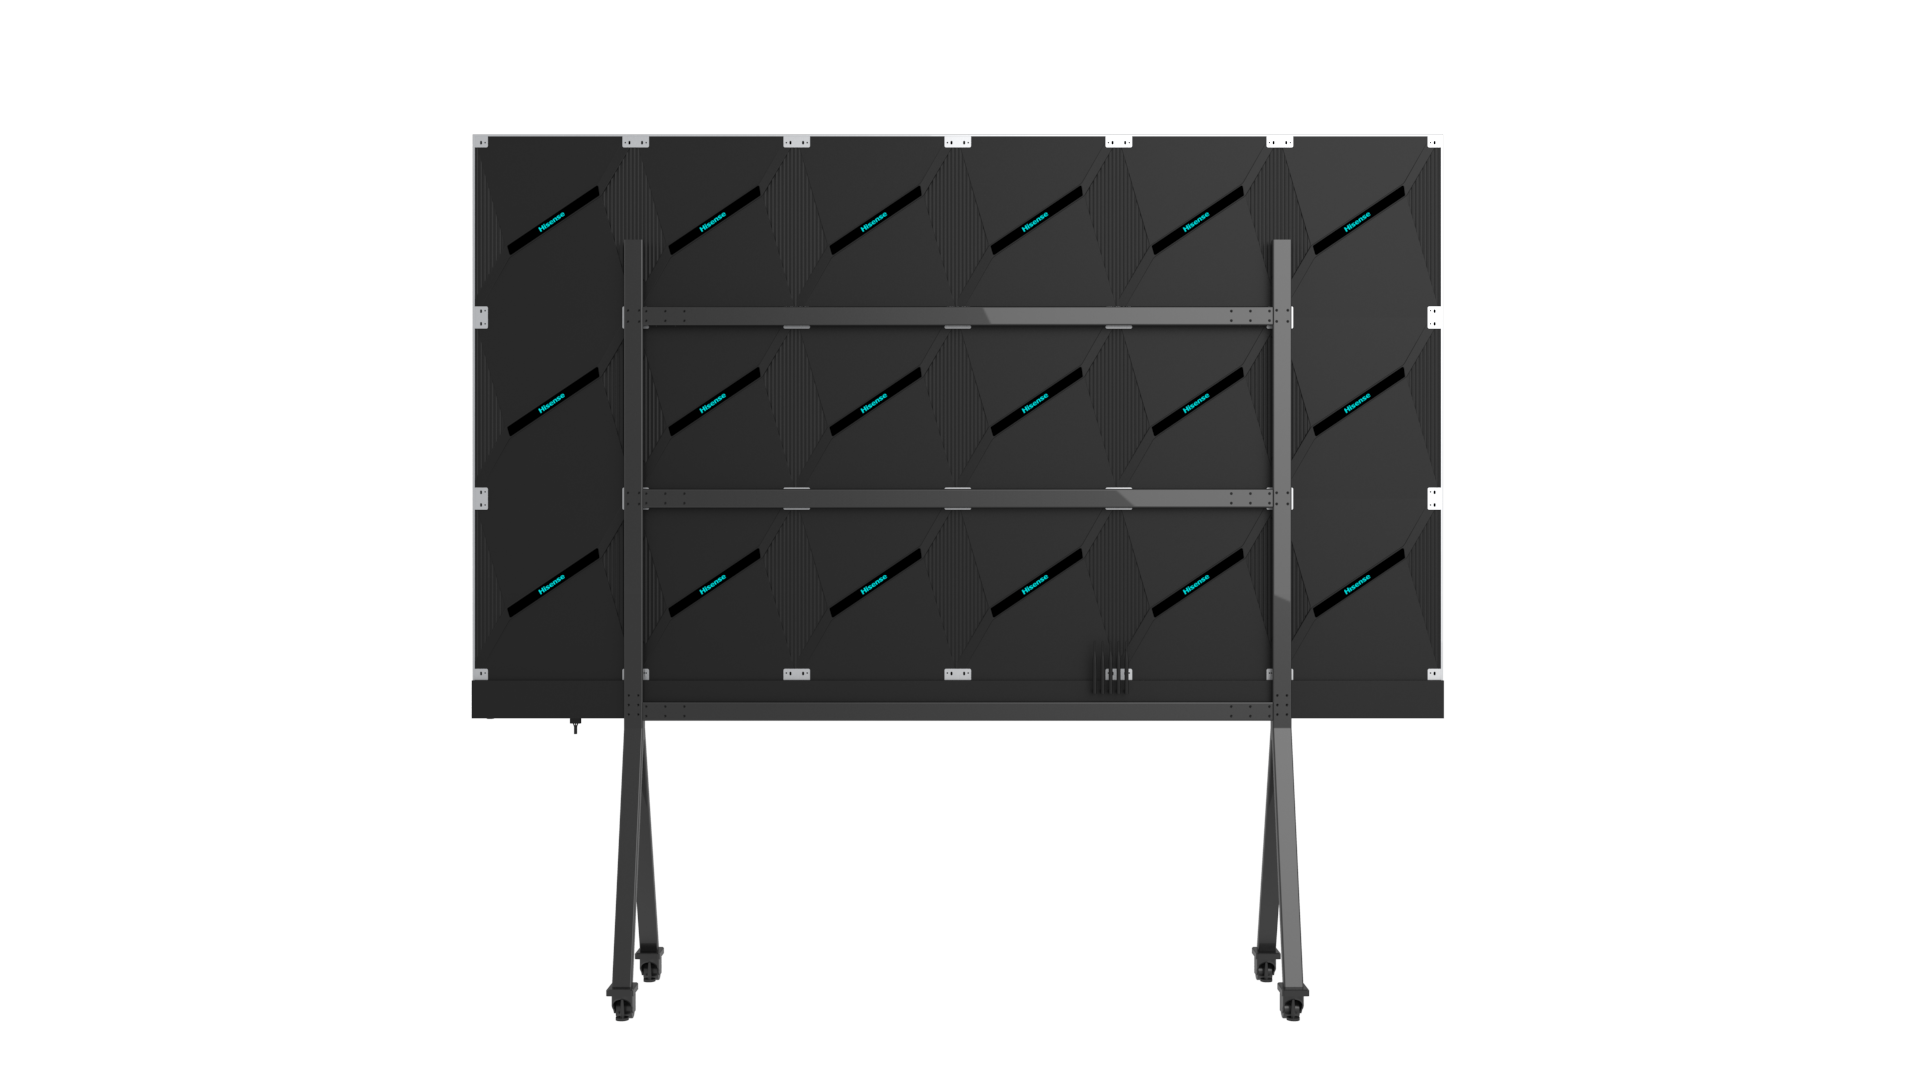 Hisense HAIO138 LED All in One Display - 138 inch - 1.59 mm PP - 500 cd/m² - Full-HD - 1920 x 1080 - LED display - with trolley